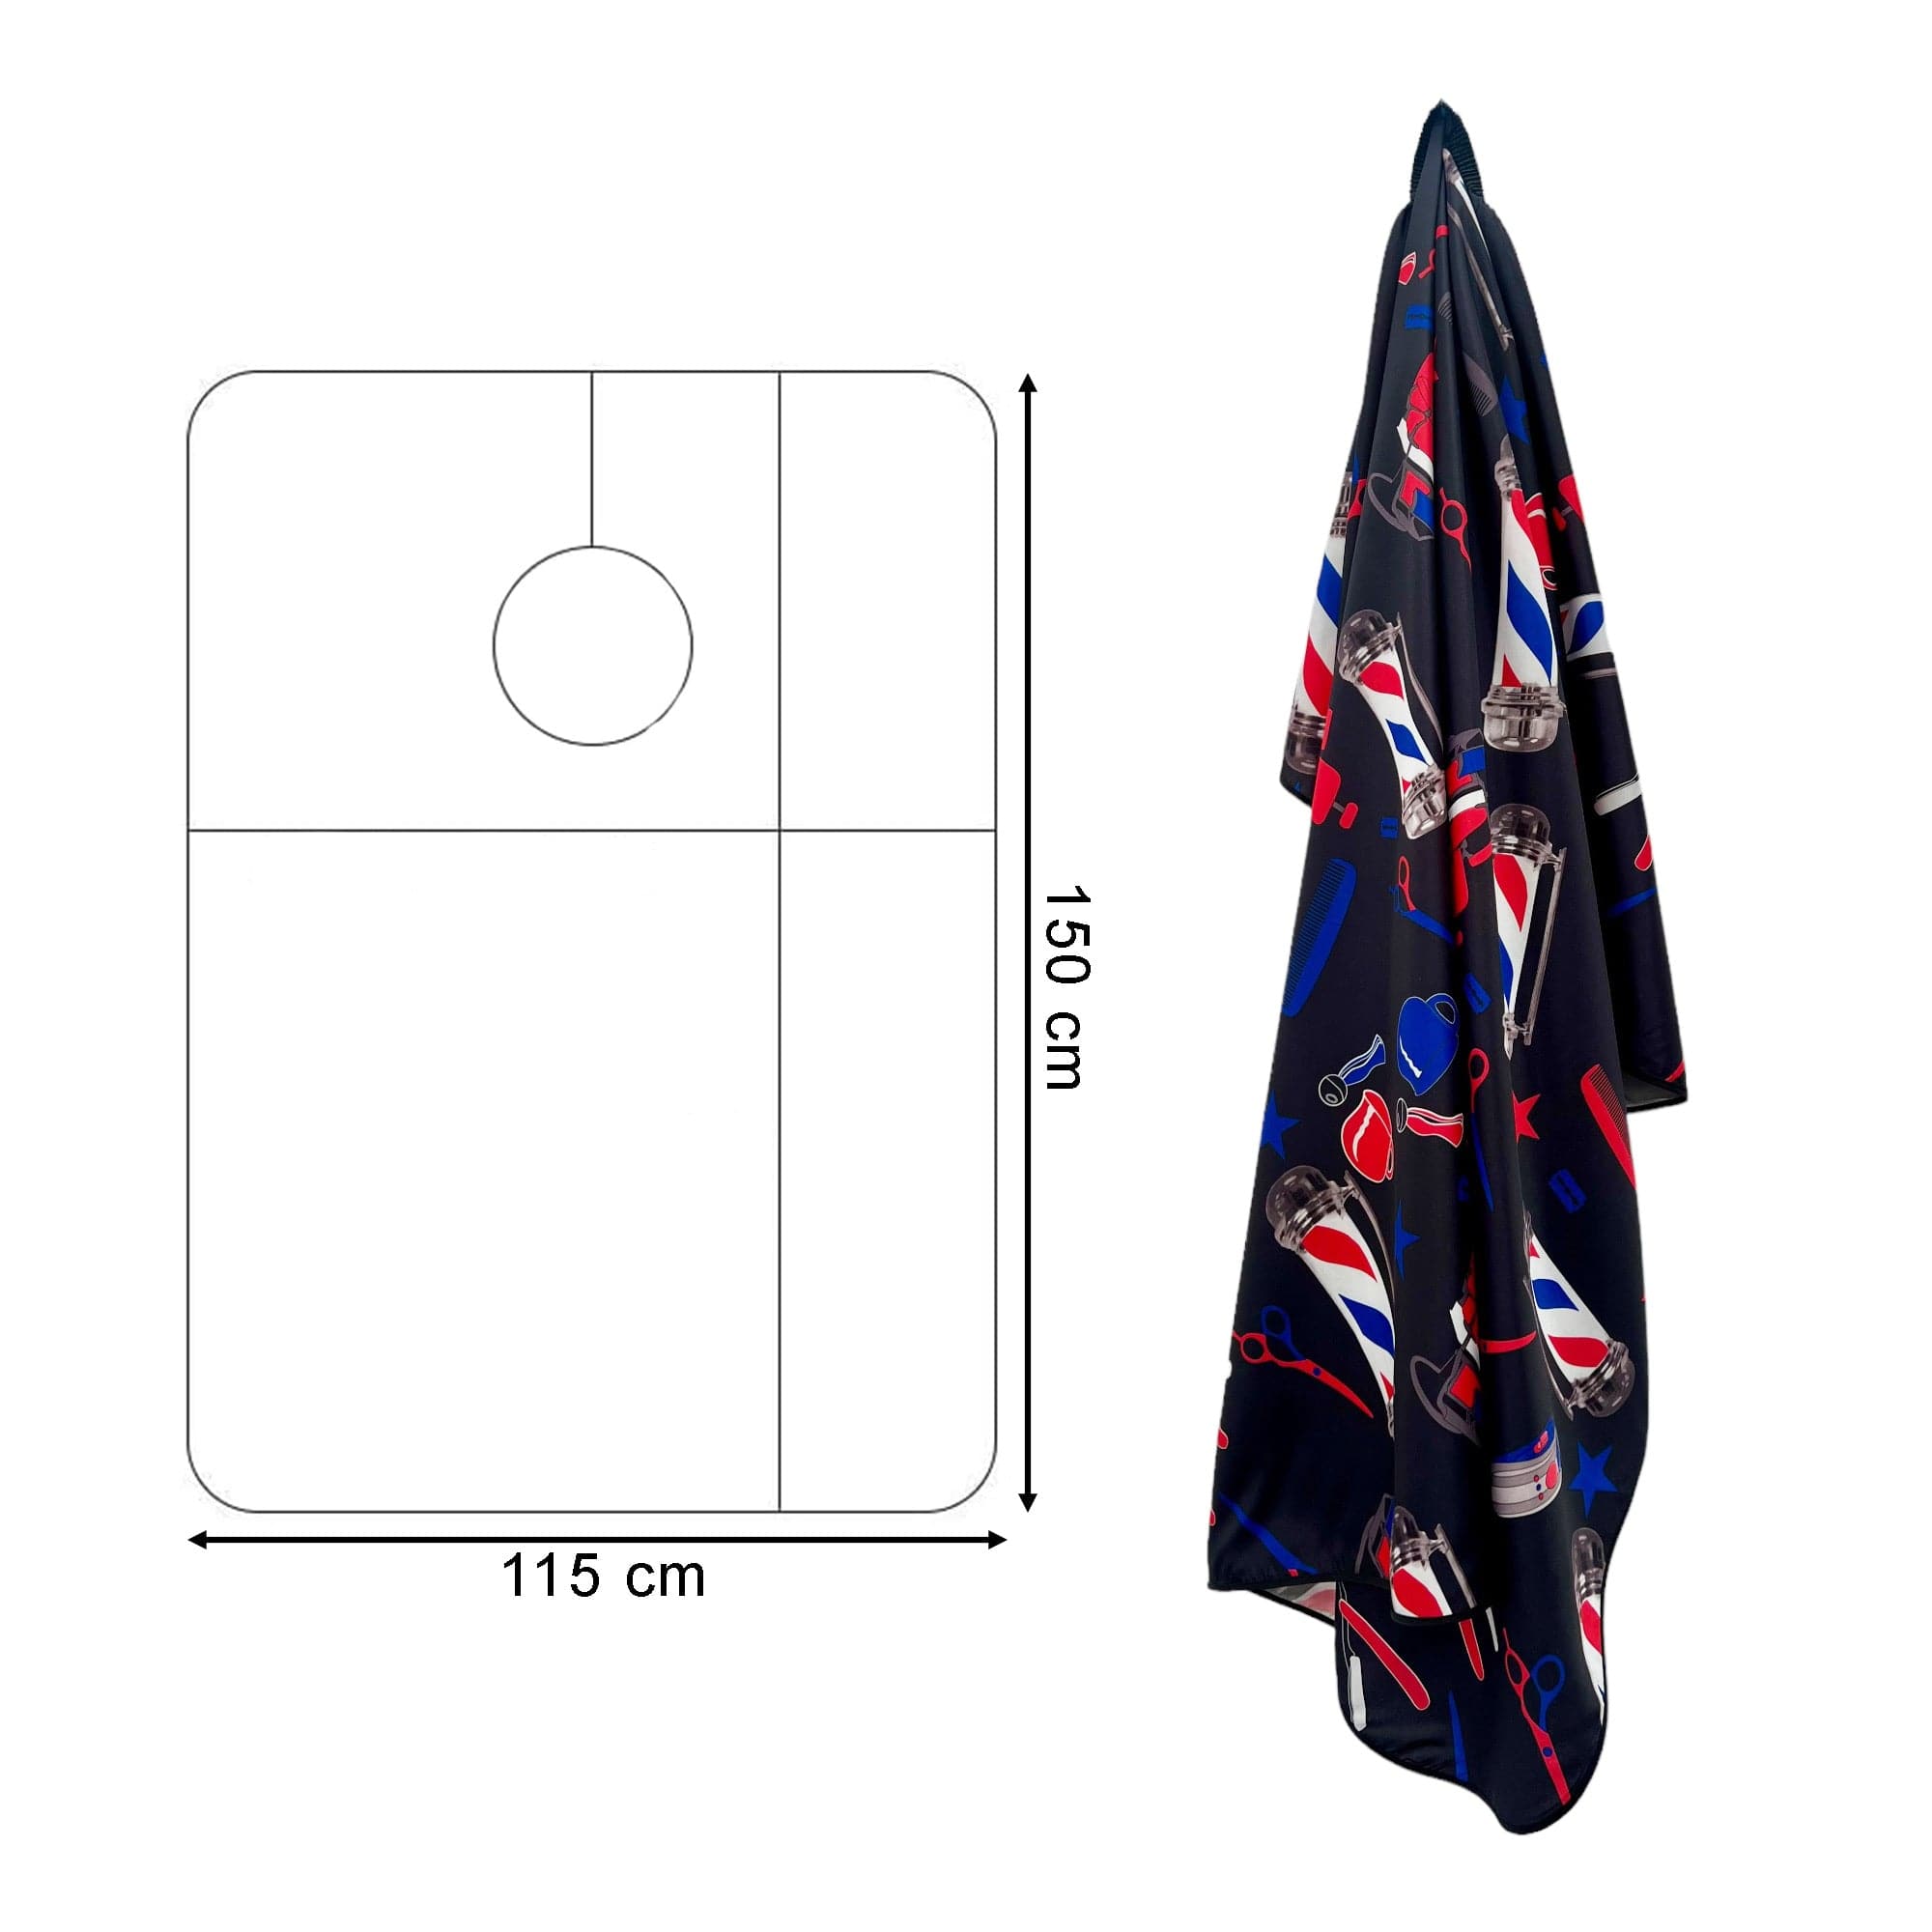 Gabri - Barber Hairdressing Hair Cutting Cape & Gown Tools Pattern (Black Red & Blue)